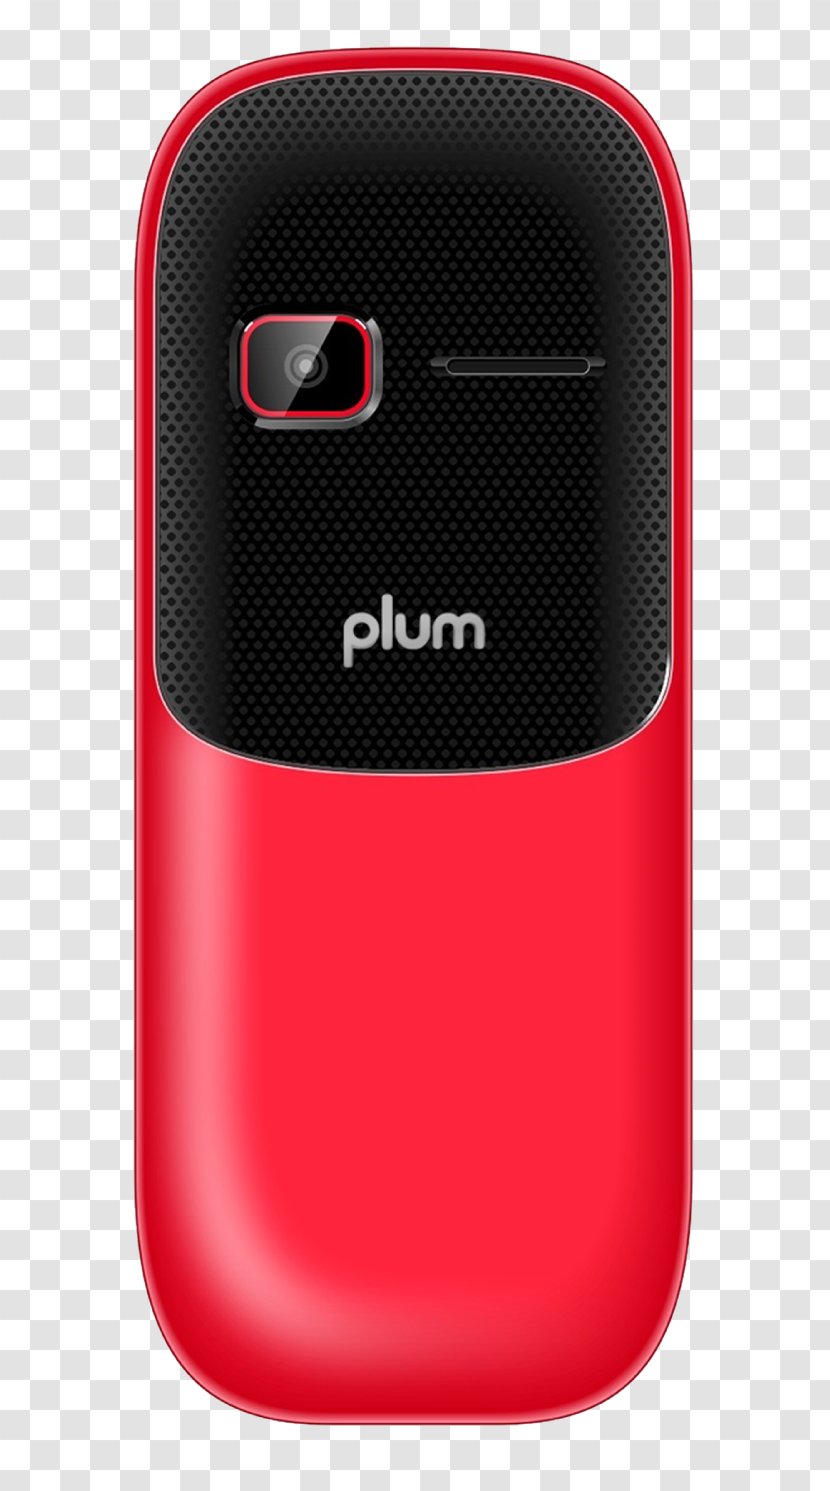 IPhone Portable Communications Device Telephone Feature Phone Cellular Network - Multiband - Plum Transparent PNG